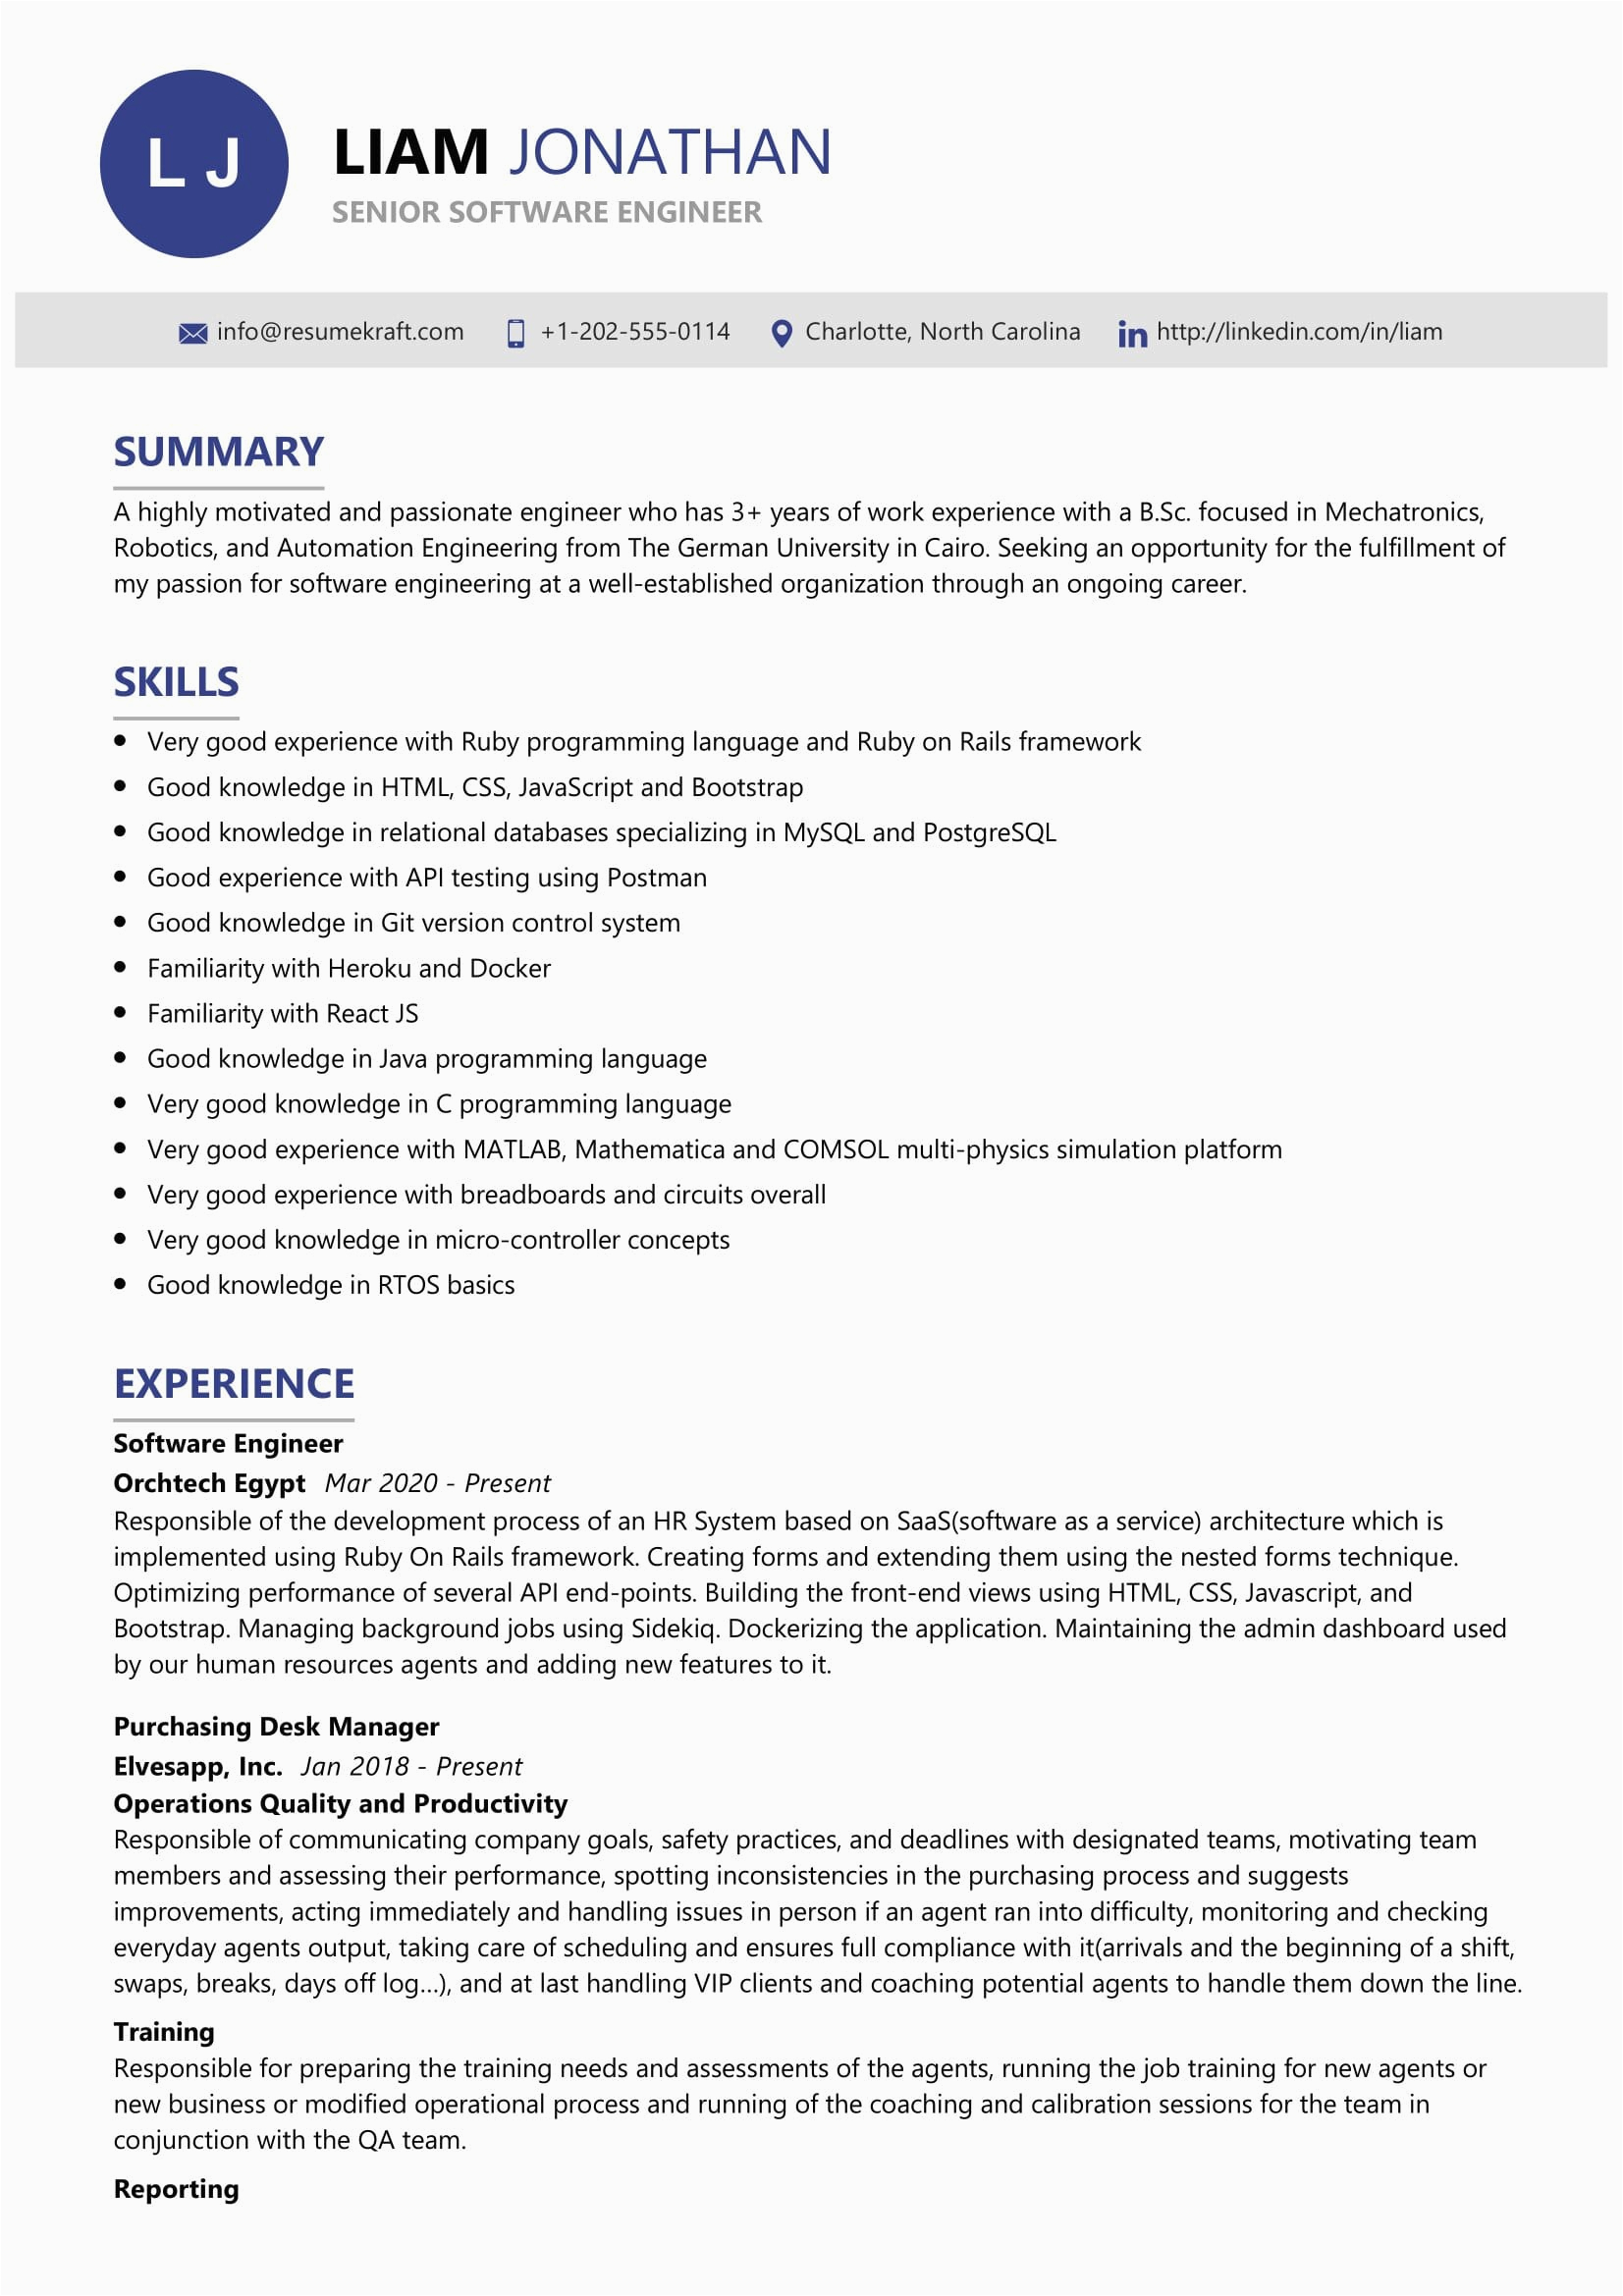 Free Resume Templates for software Engineer Senior software Engineer Resume Sample Resumekraft